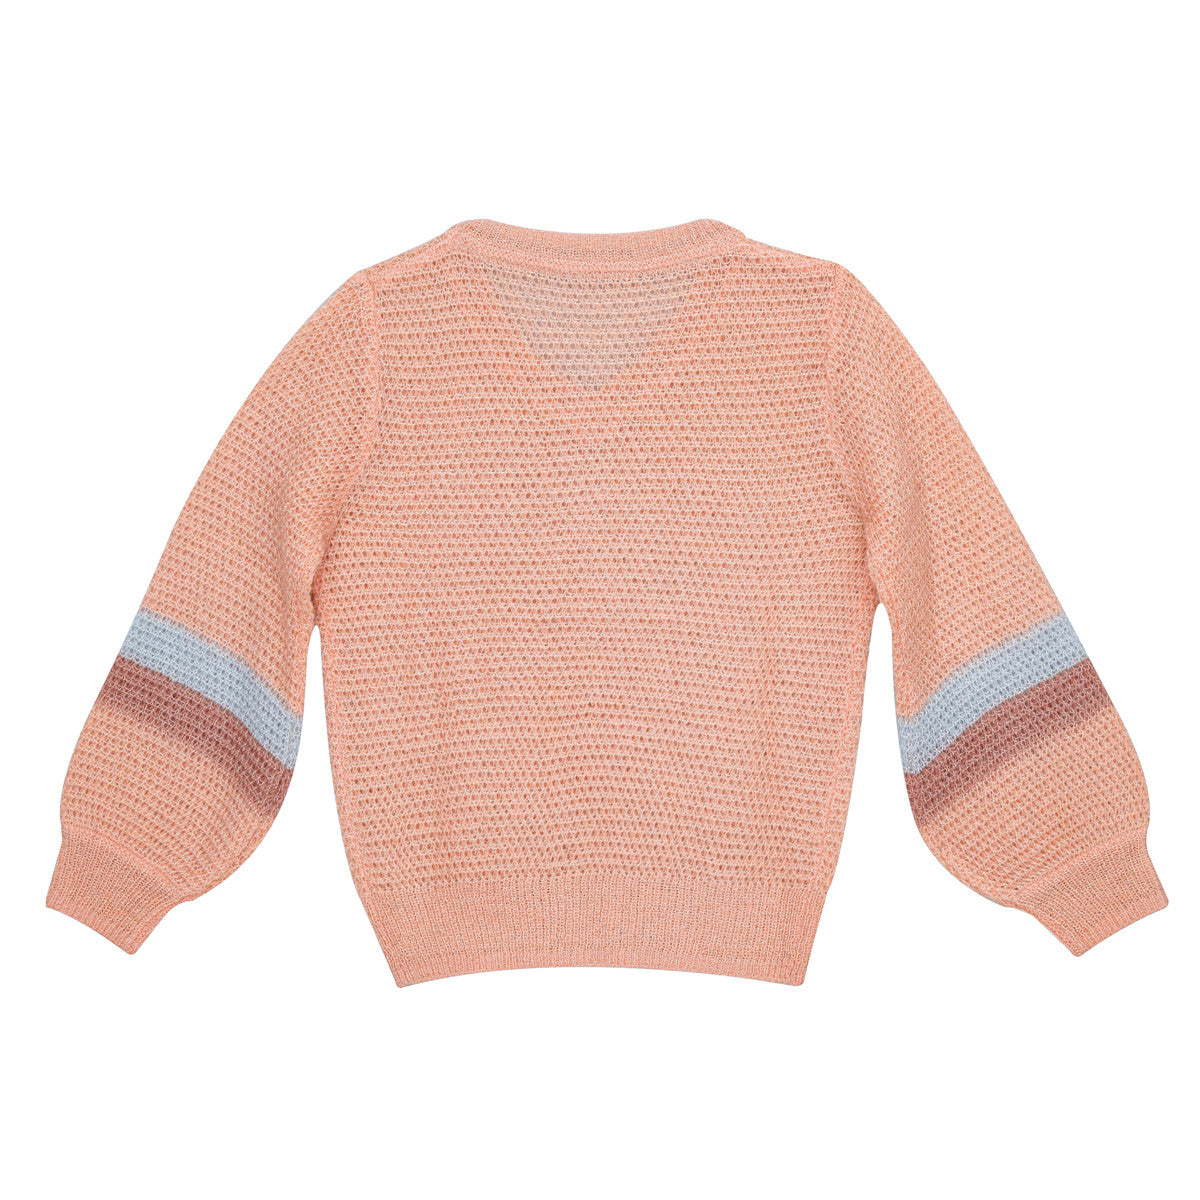 Little Hedonist V-Neck Knitted Jersey Sandy
V-Neck Knitted Jersey in Evening Sand. For this jersey for girls we use recycled materials. Sustainable kids clothing!